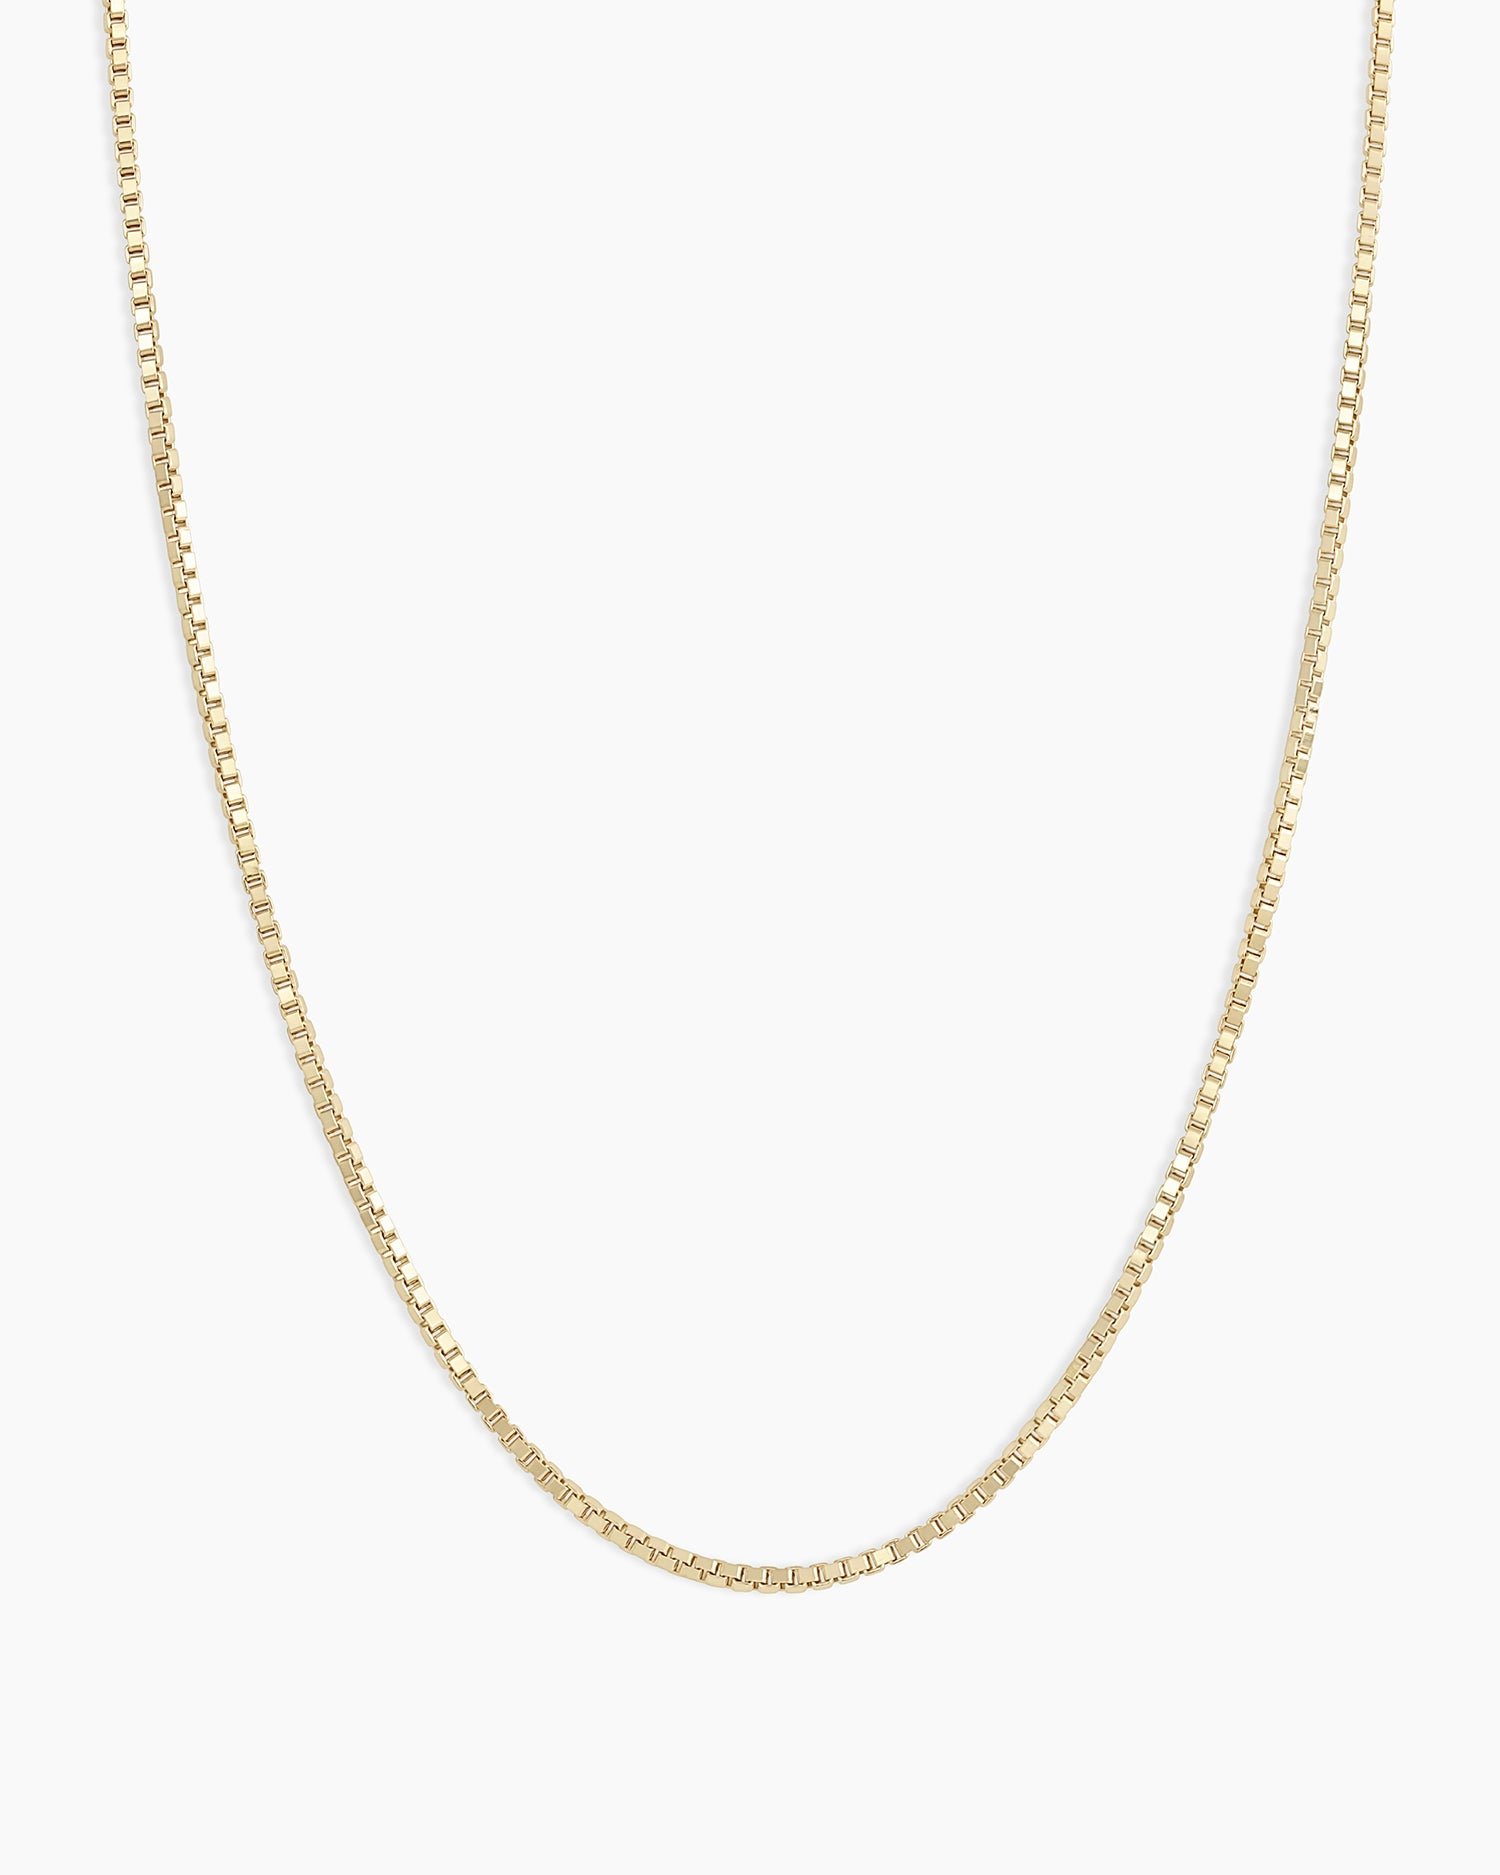  TheHonestJeweler 14k Solid Gold Extendable Box chain